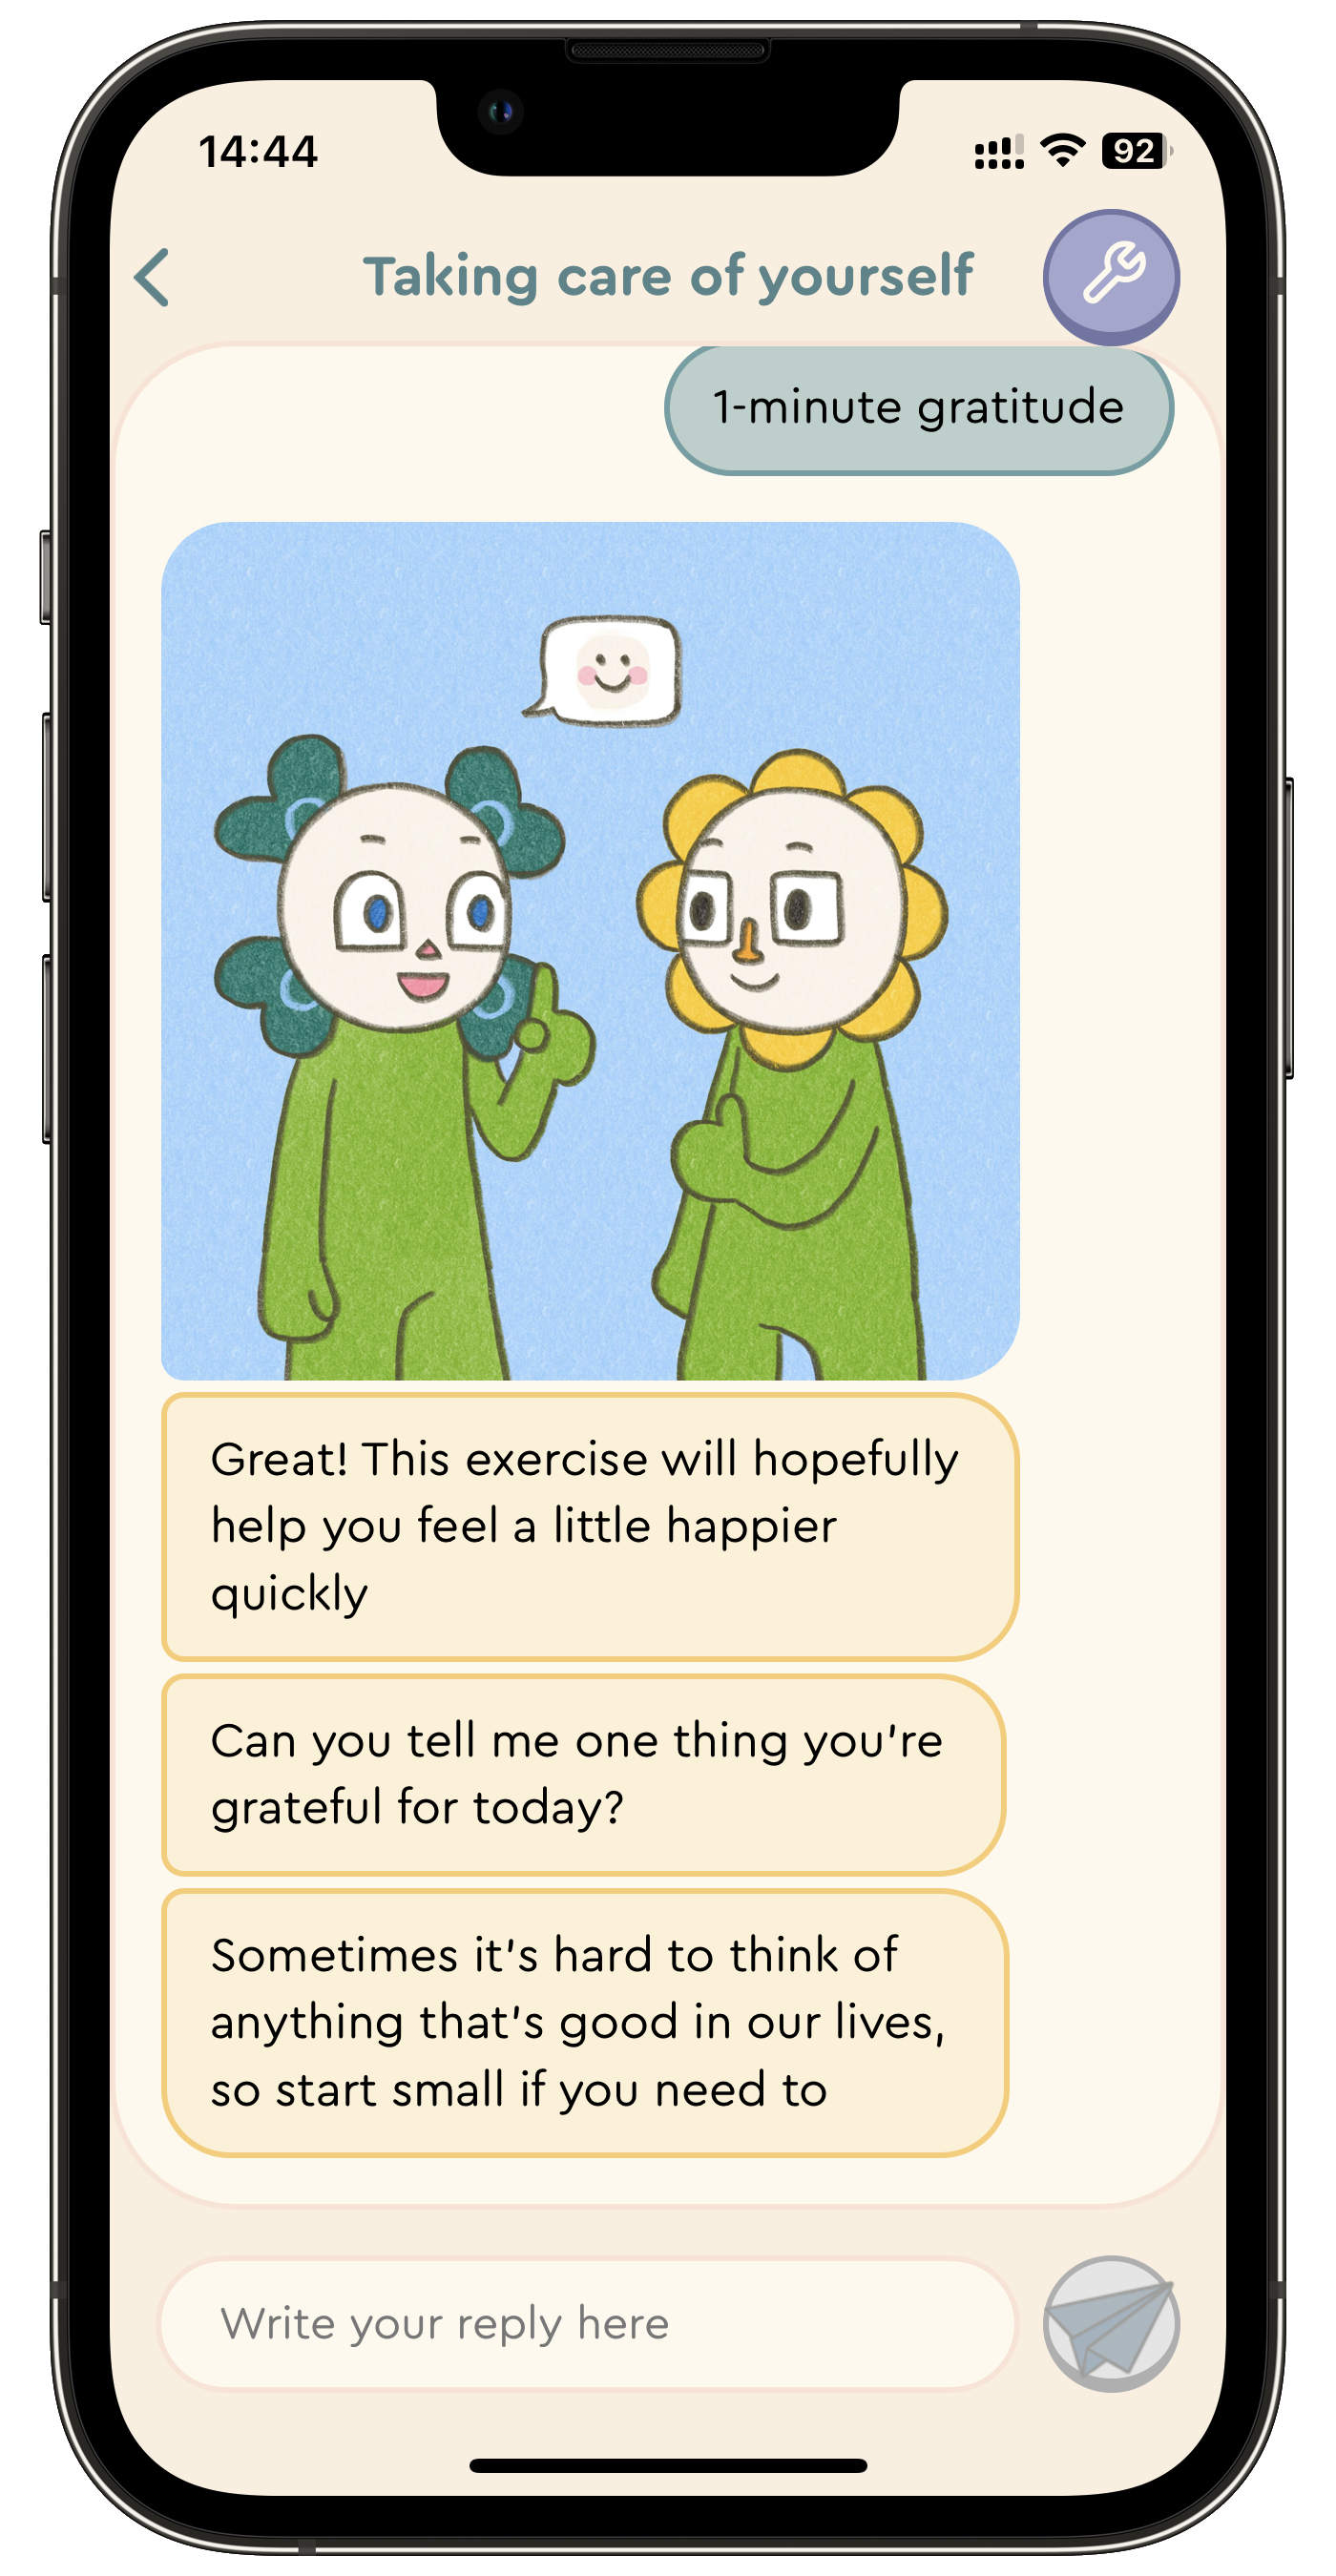 A mobile phone displaying the UB-OK app on the conversation screen. The user is in the middle of a gratitude exercise, and has just been asked to write down one thing they're grateful for today